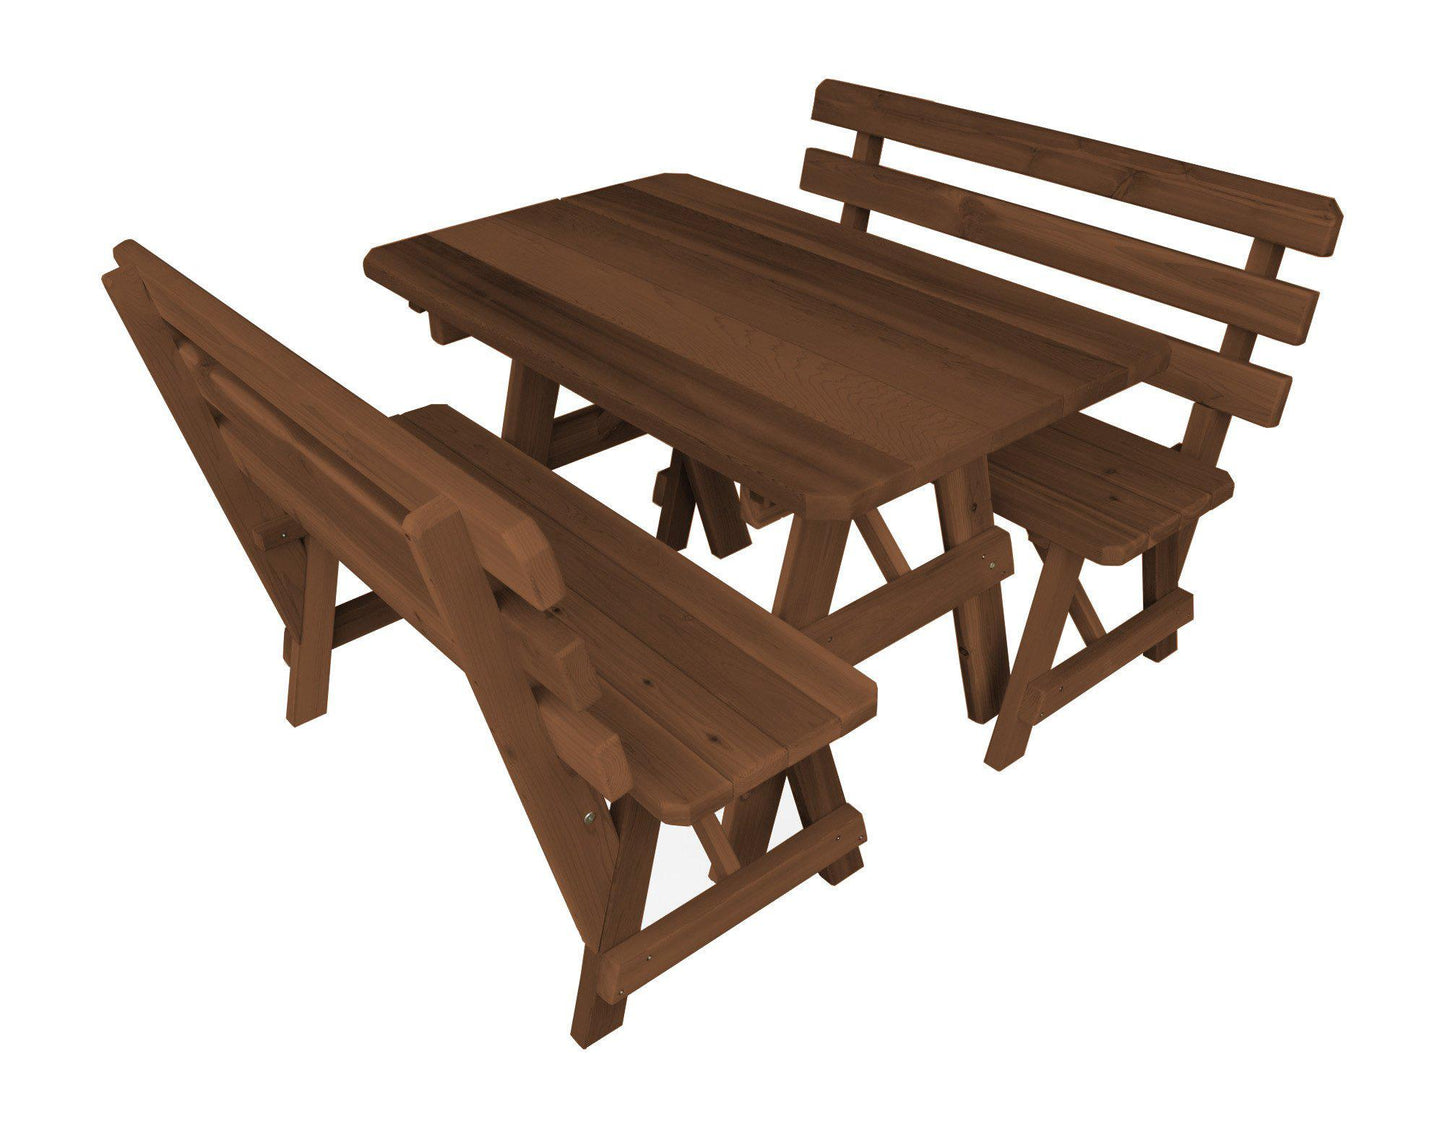 A&L FURNITURE CO. Western Red Cedar 94" Table w/2 Backed Benches - Specify for FREE 2" Umbrella Hole - LEAD TIME TO SHIP 4 WEEKS OR LESS